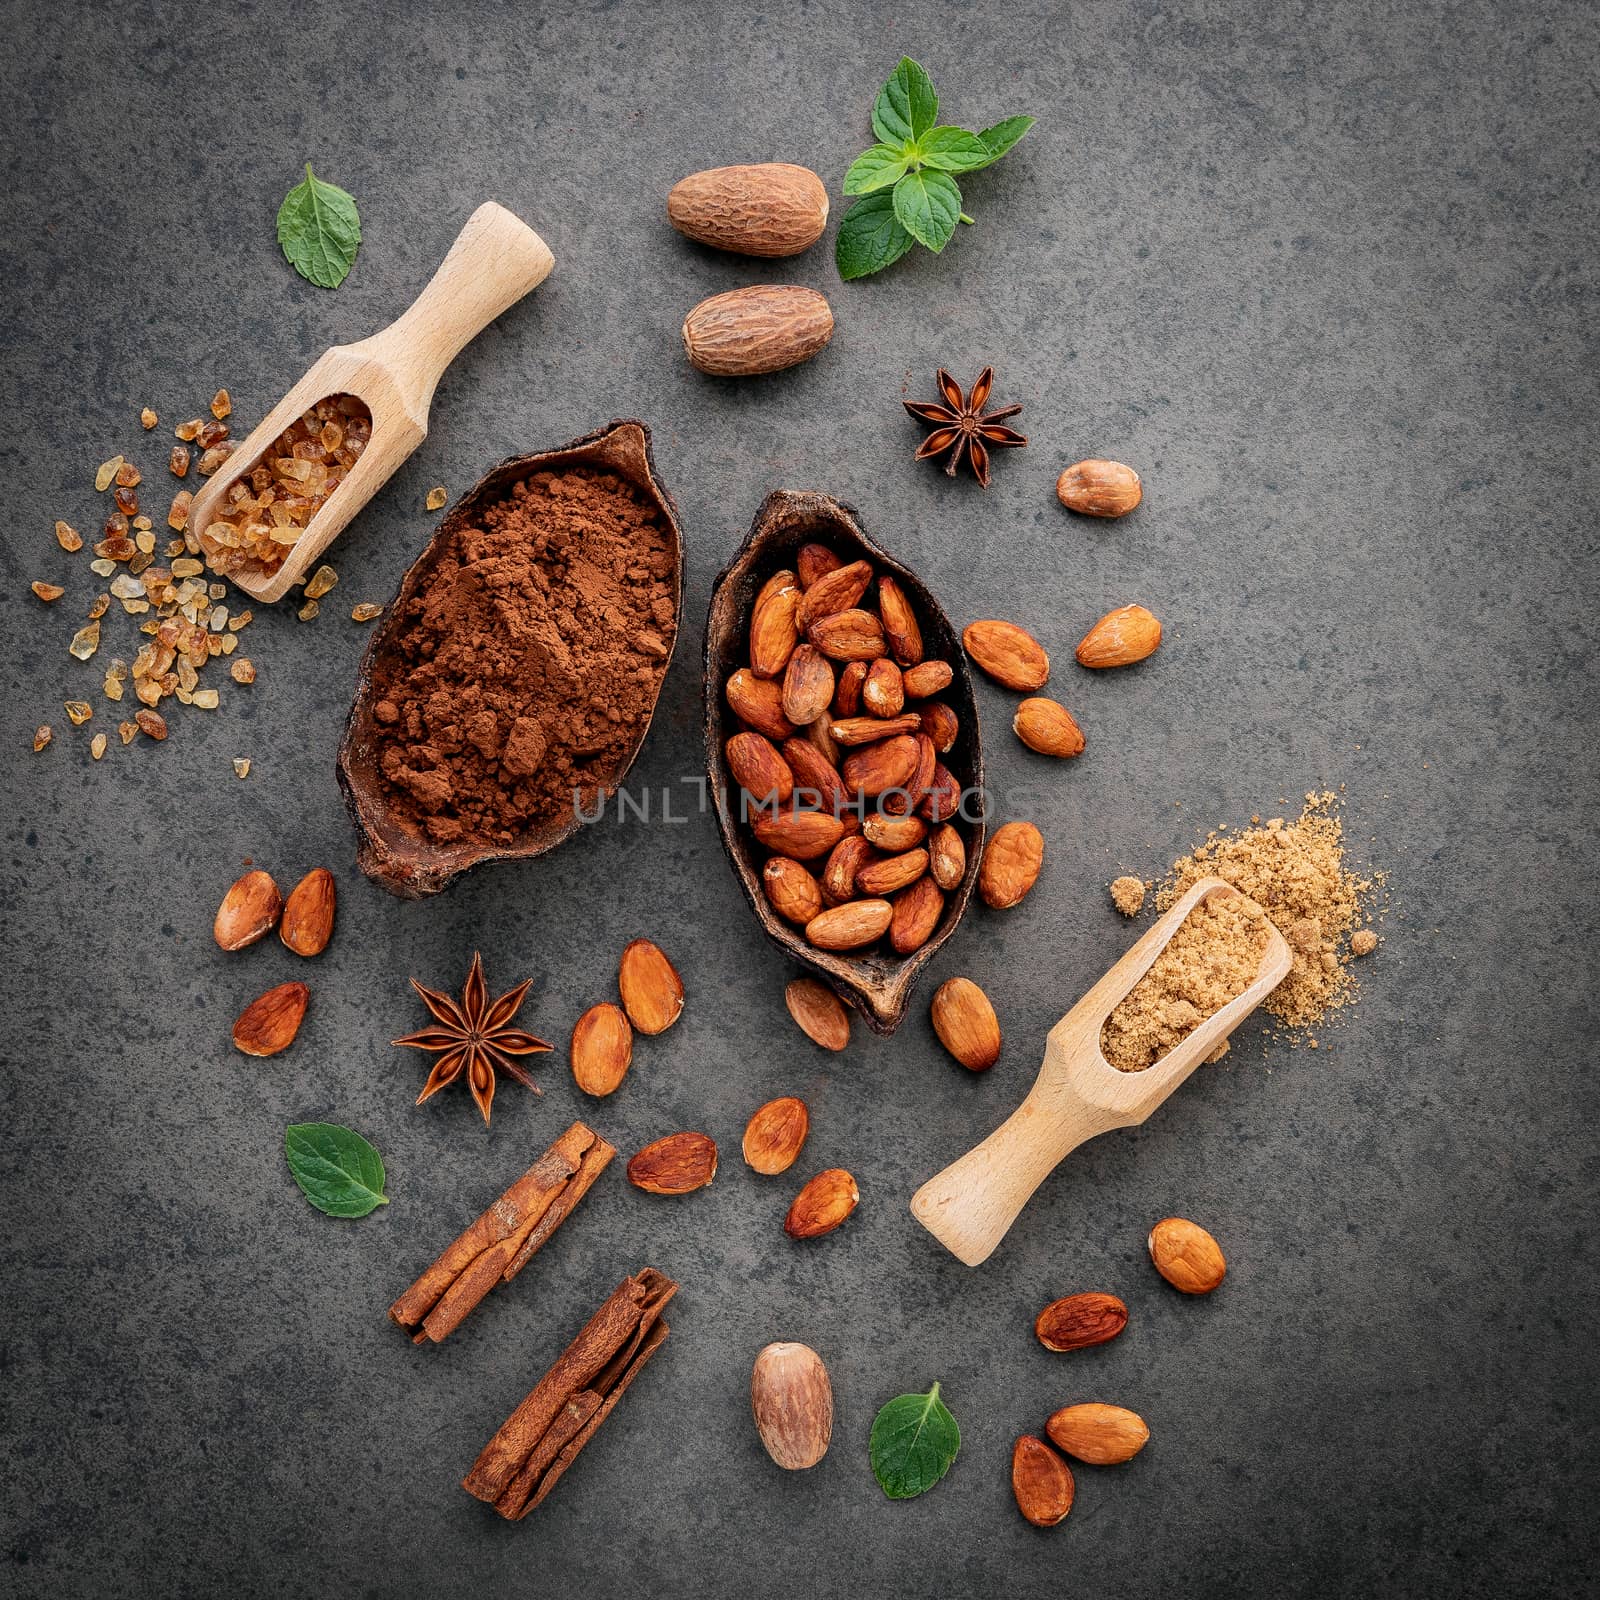 Cocoa powder and cacao beans on stone background.